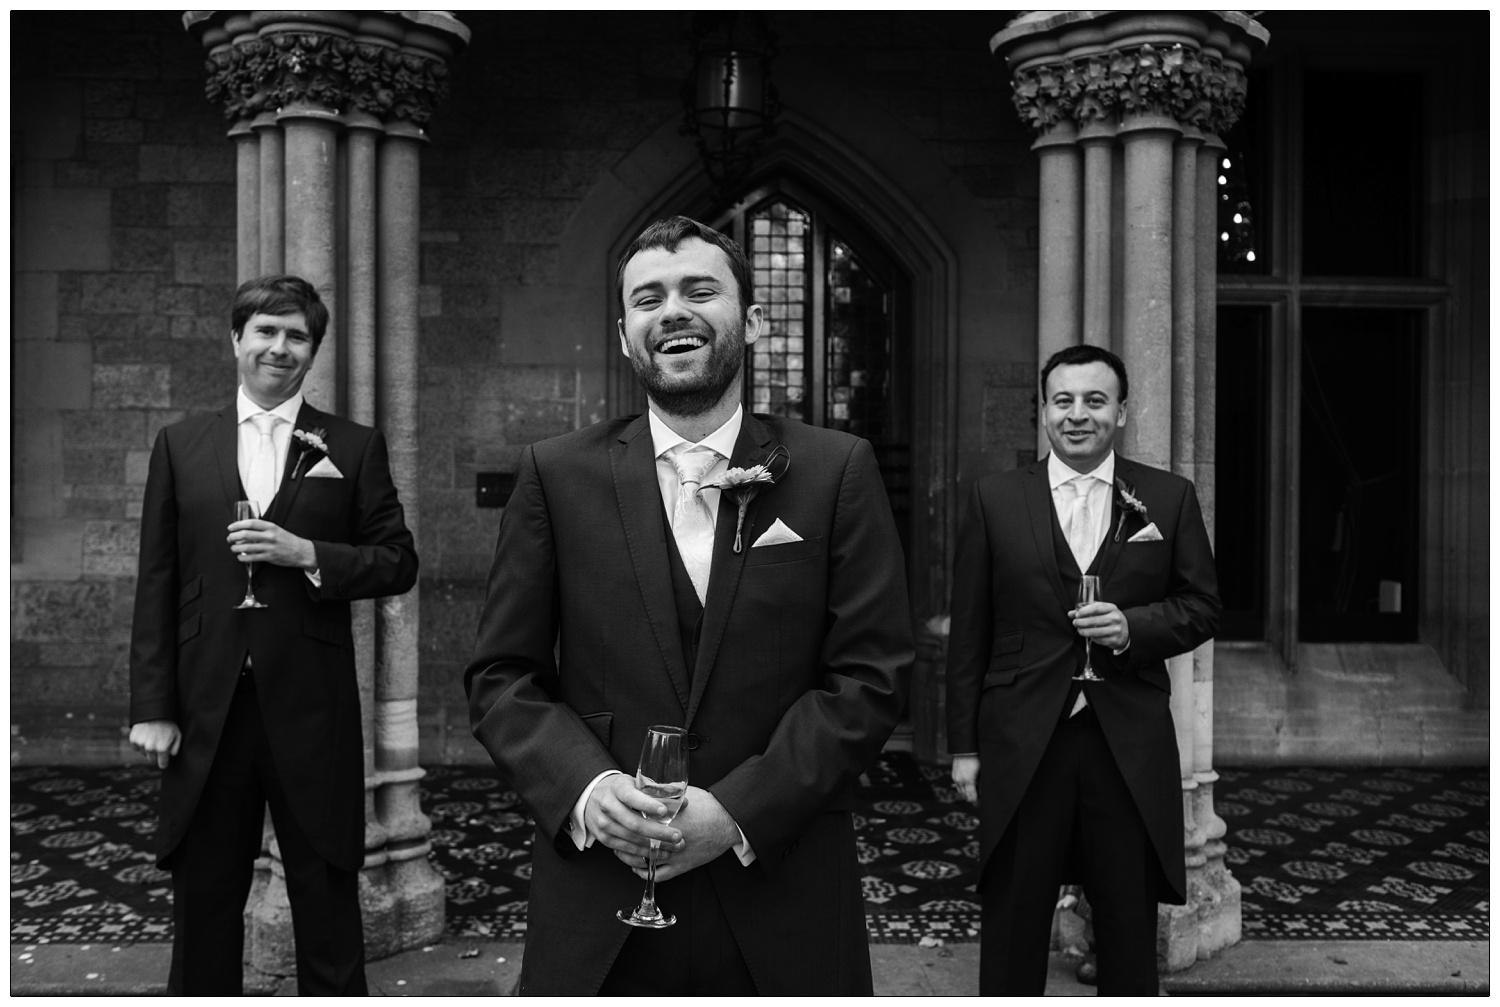 Black and white casual photo of groom with his groomsmen. He is laughing and they are all holding drinks.